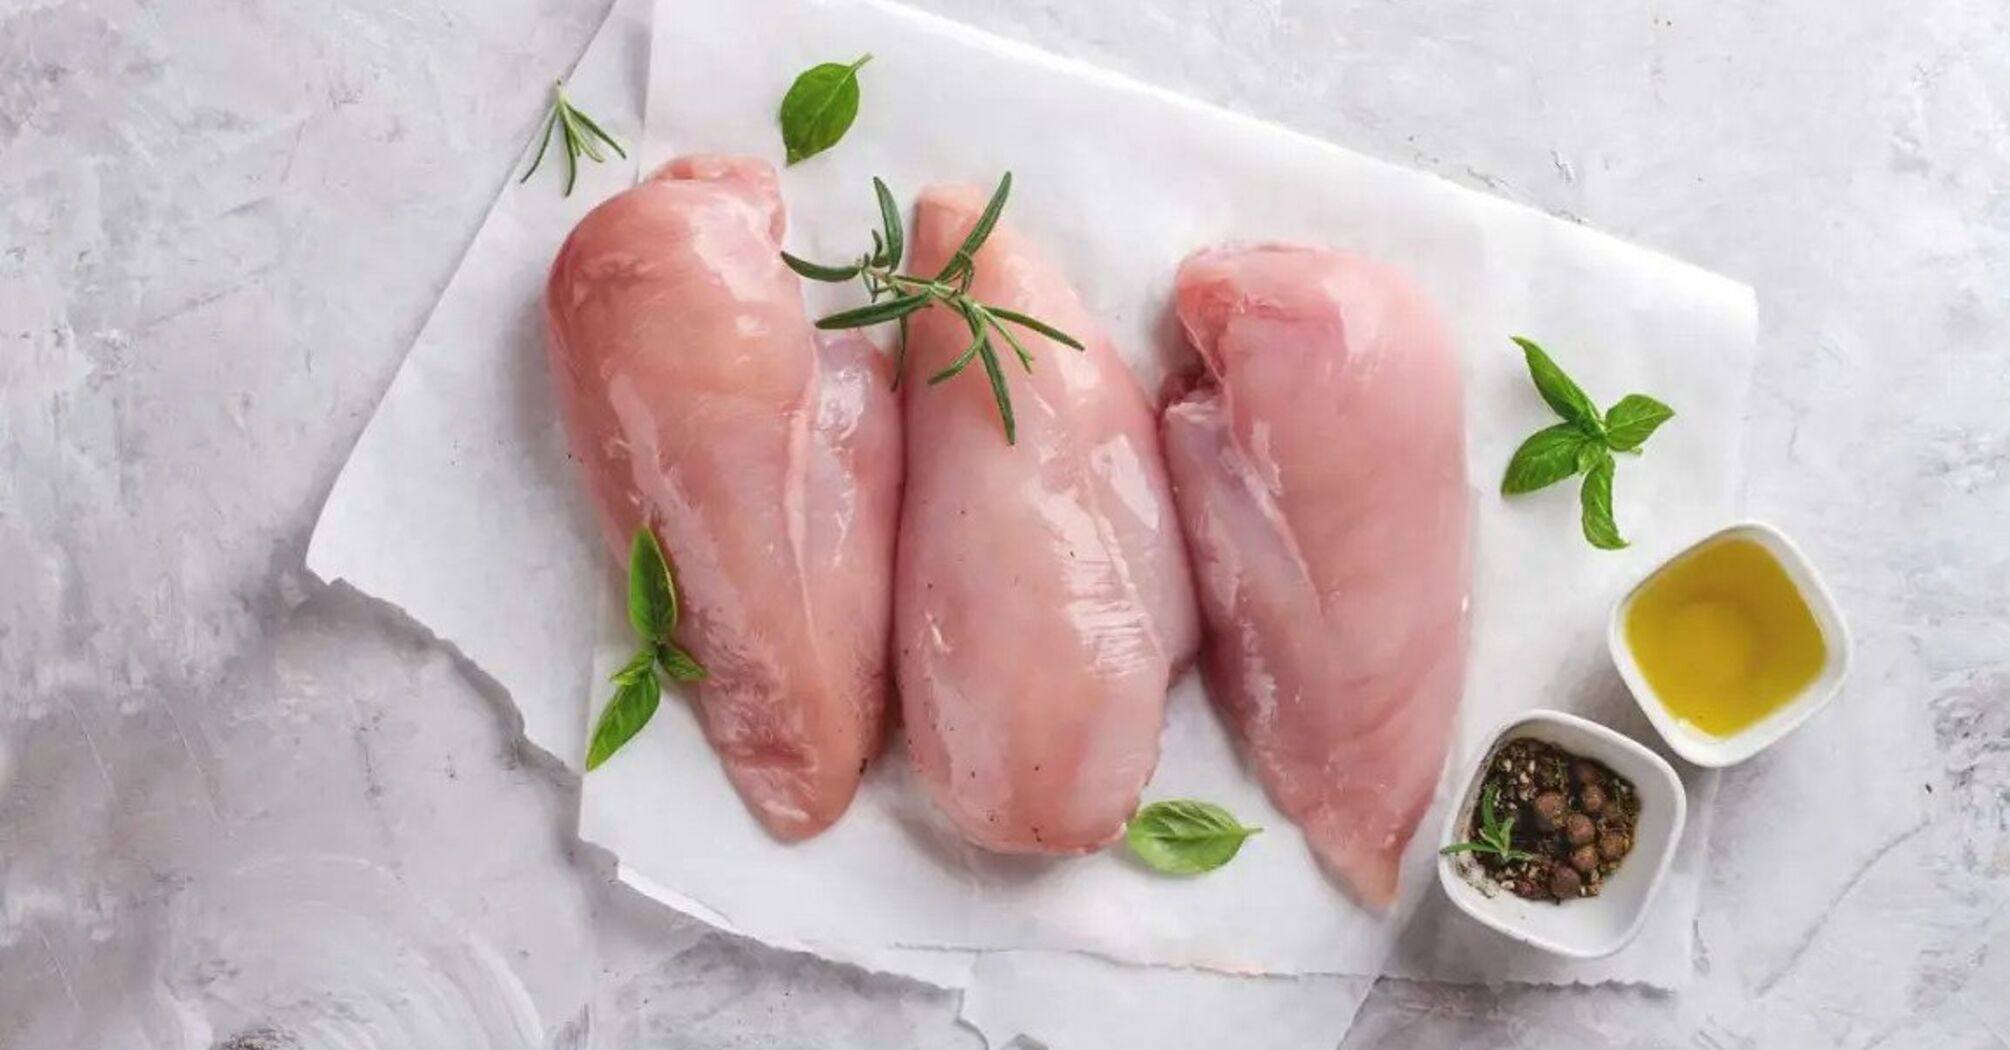 Why eating raw chicken is dangerous